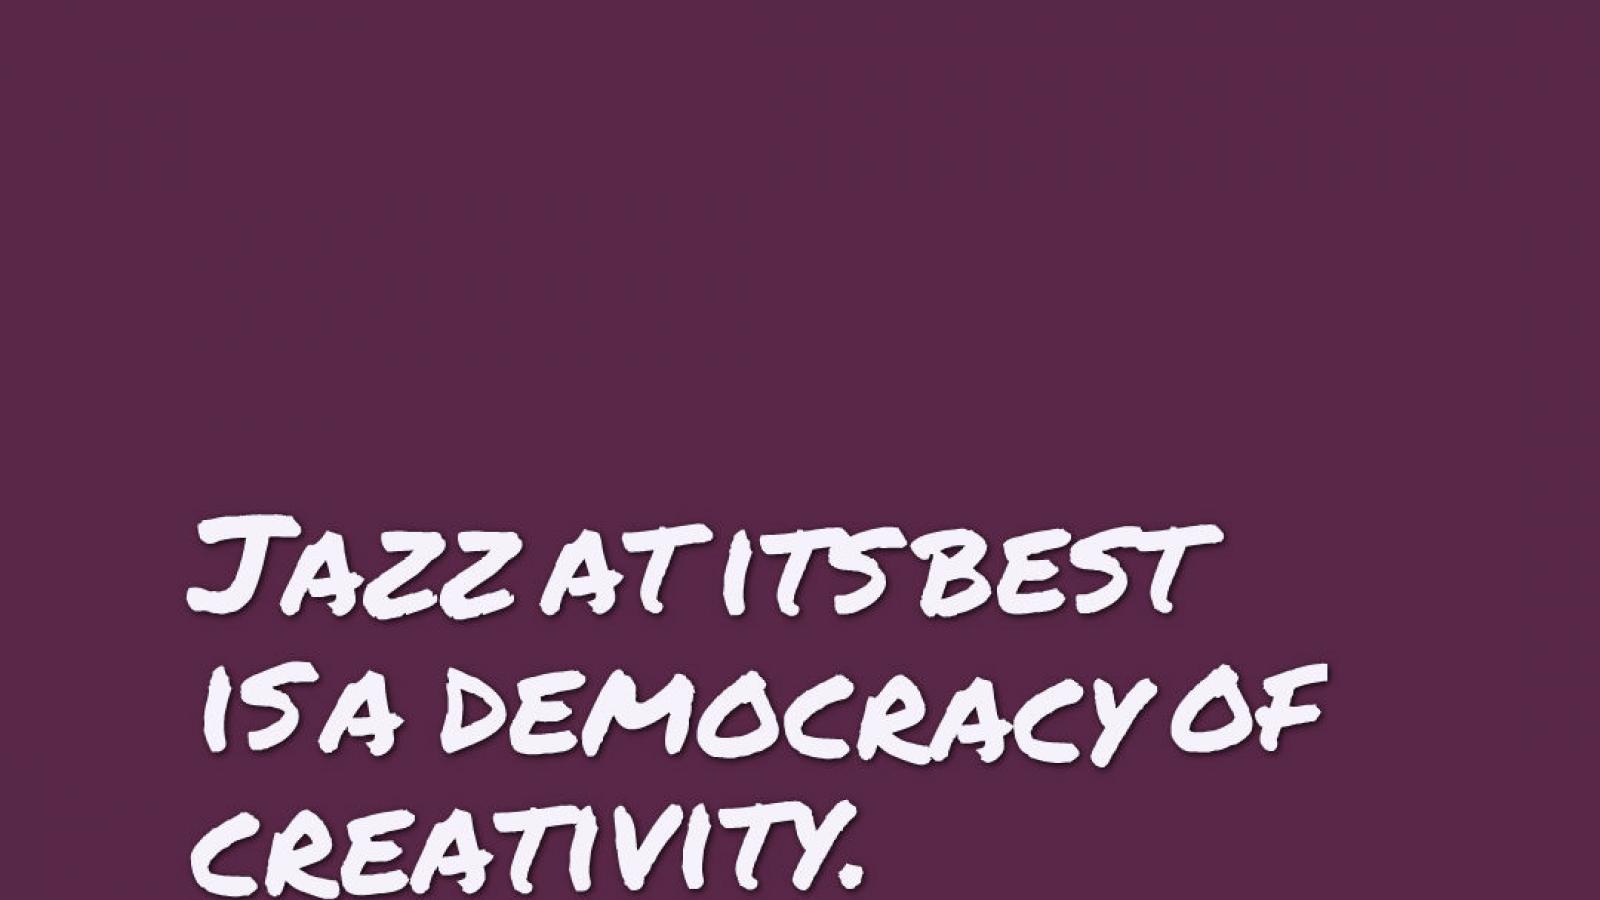 Quote from NEA Jazz Master Jimmy Heath that says Jazz at its best is a democracy of creativity